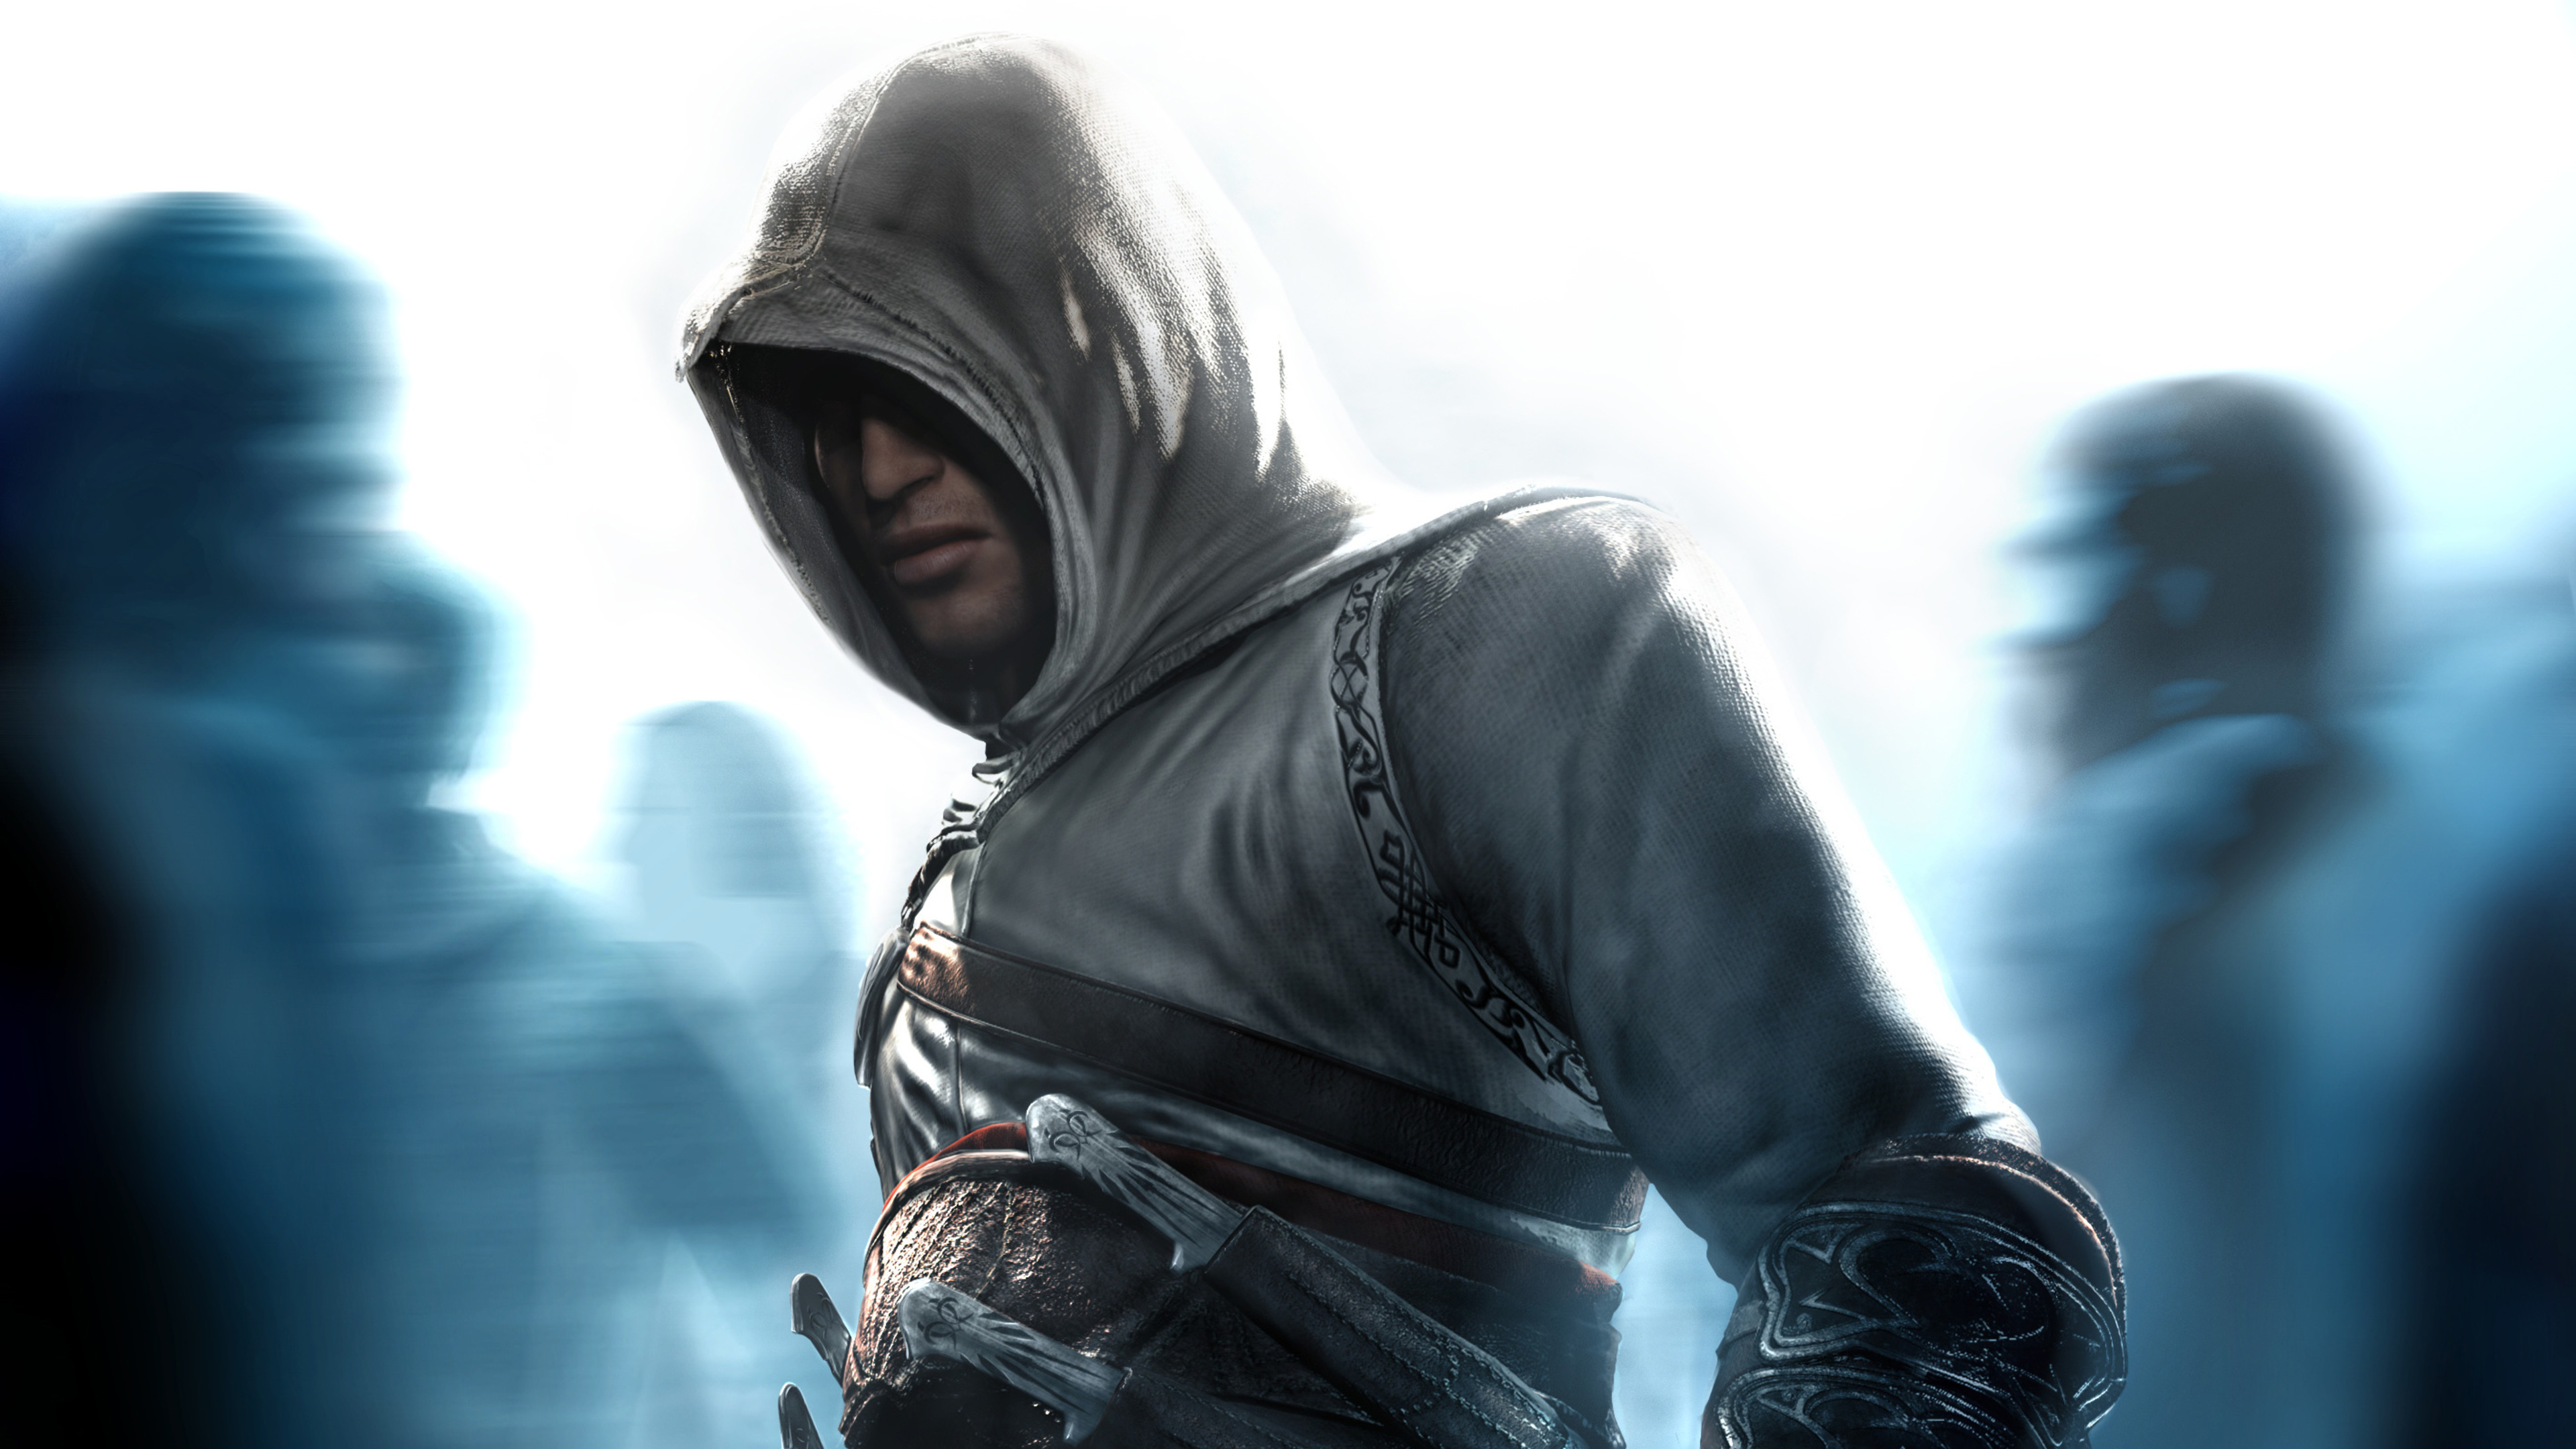 video game, assassin's creed, altair (assassin's creed) Full HD